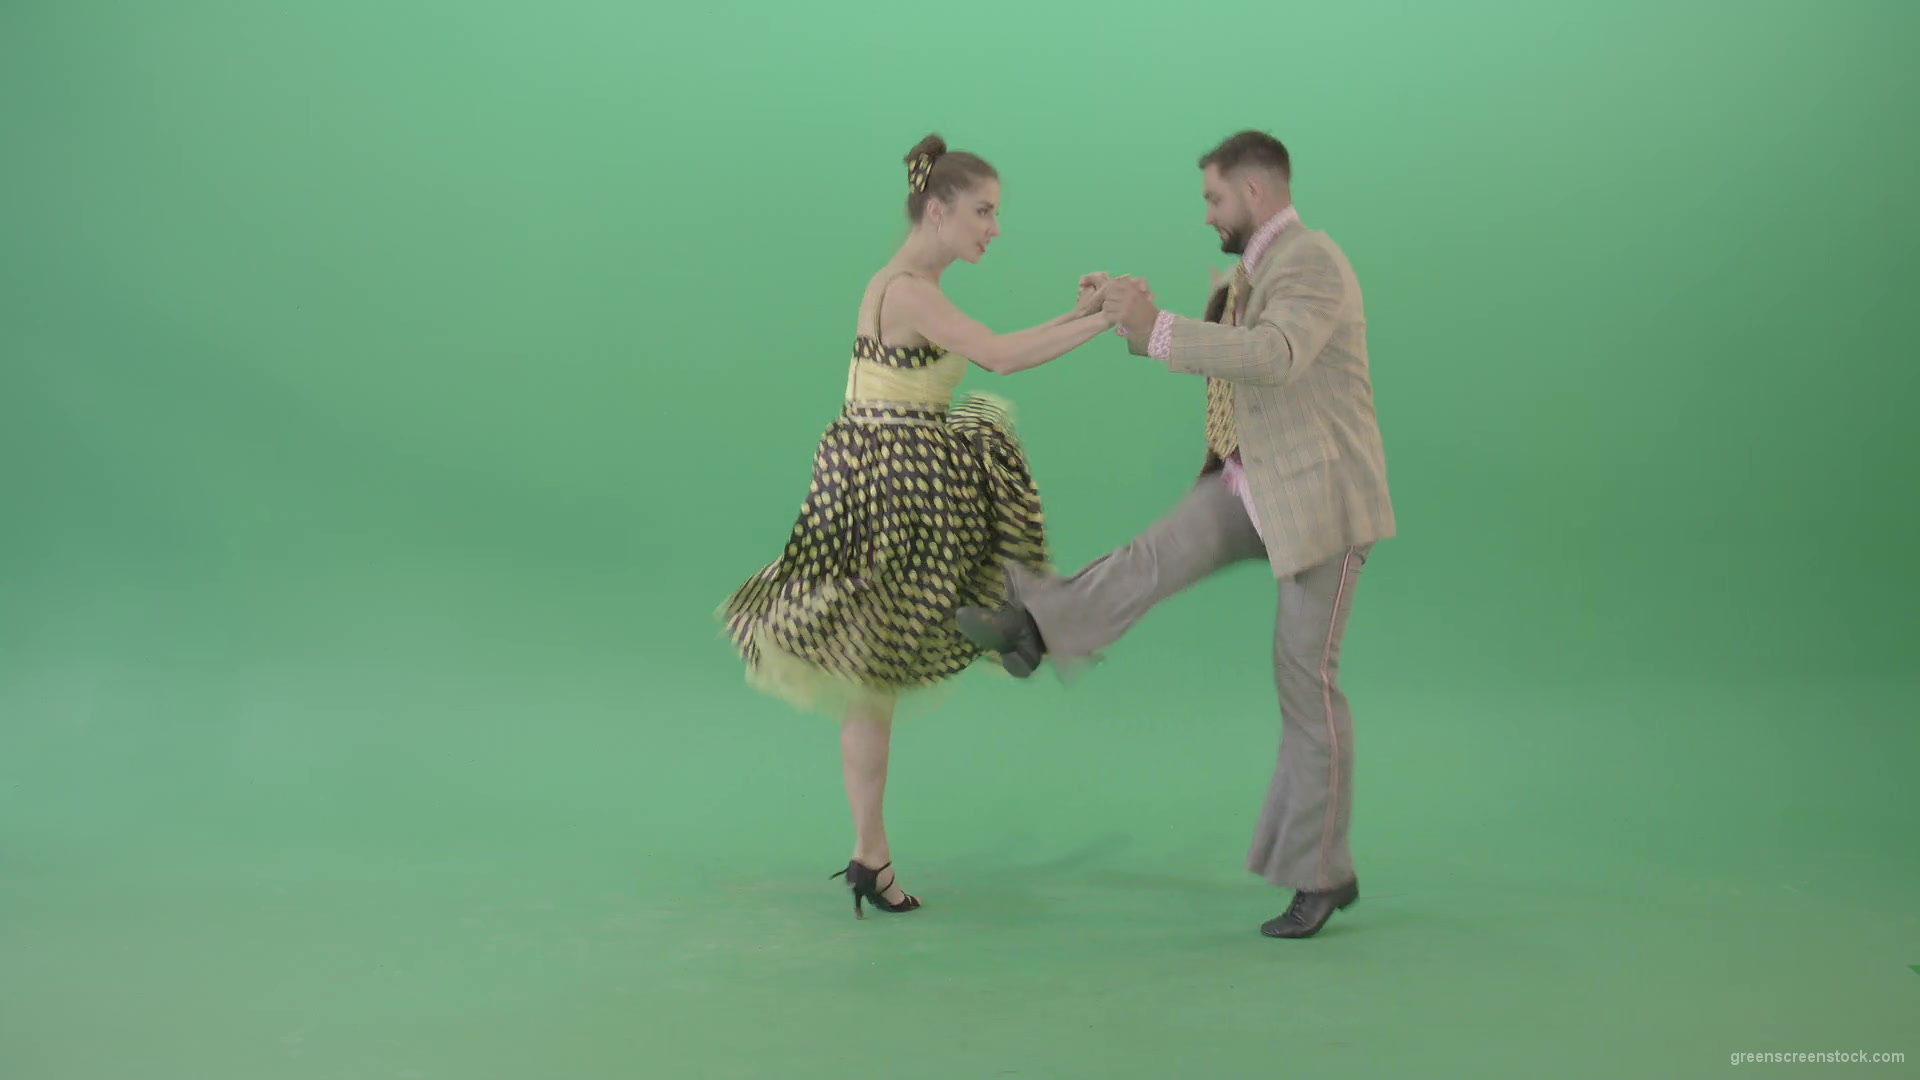 Lovely-couple-jumping-in-Boogie-woogie-dance-isolated-on-Green-Screen-4K-Video-Stock-Footage-1920_002 Green Screen Stock